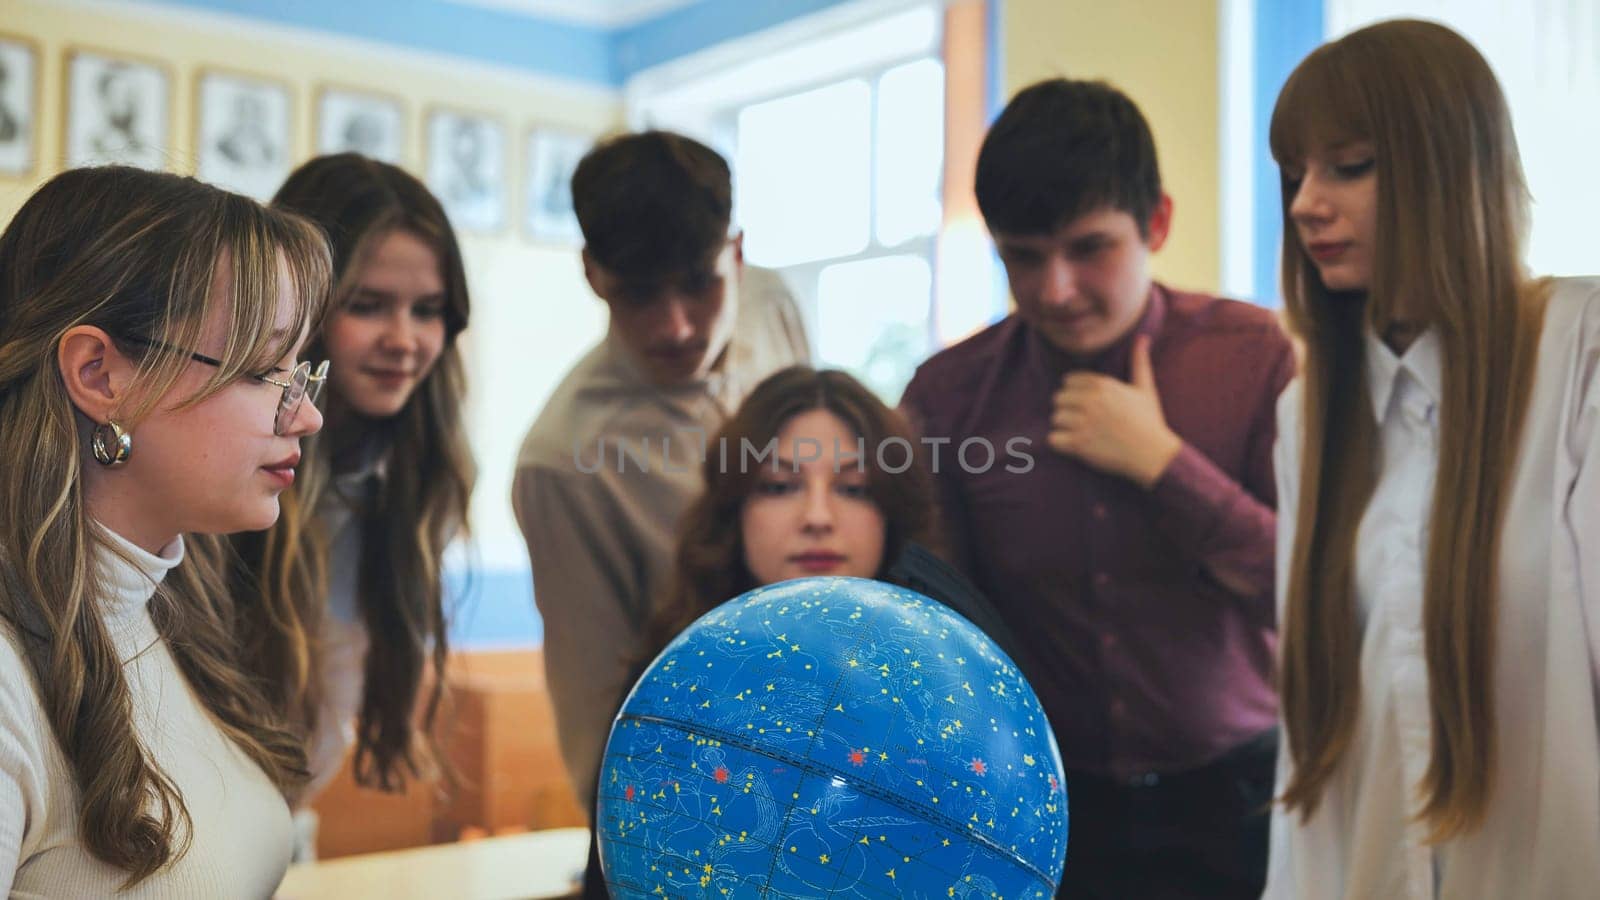 Students look at a globe of the starry sky in a classroom at school. by DovidPro